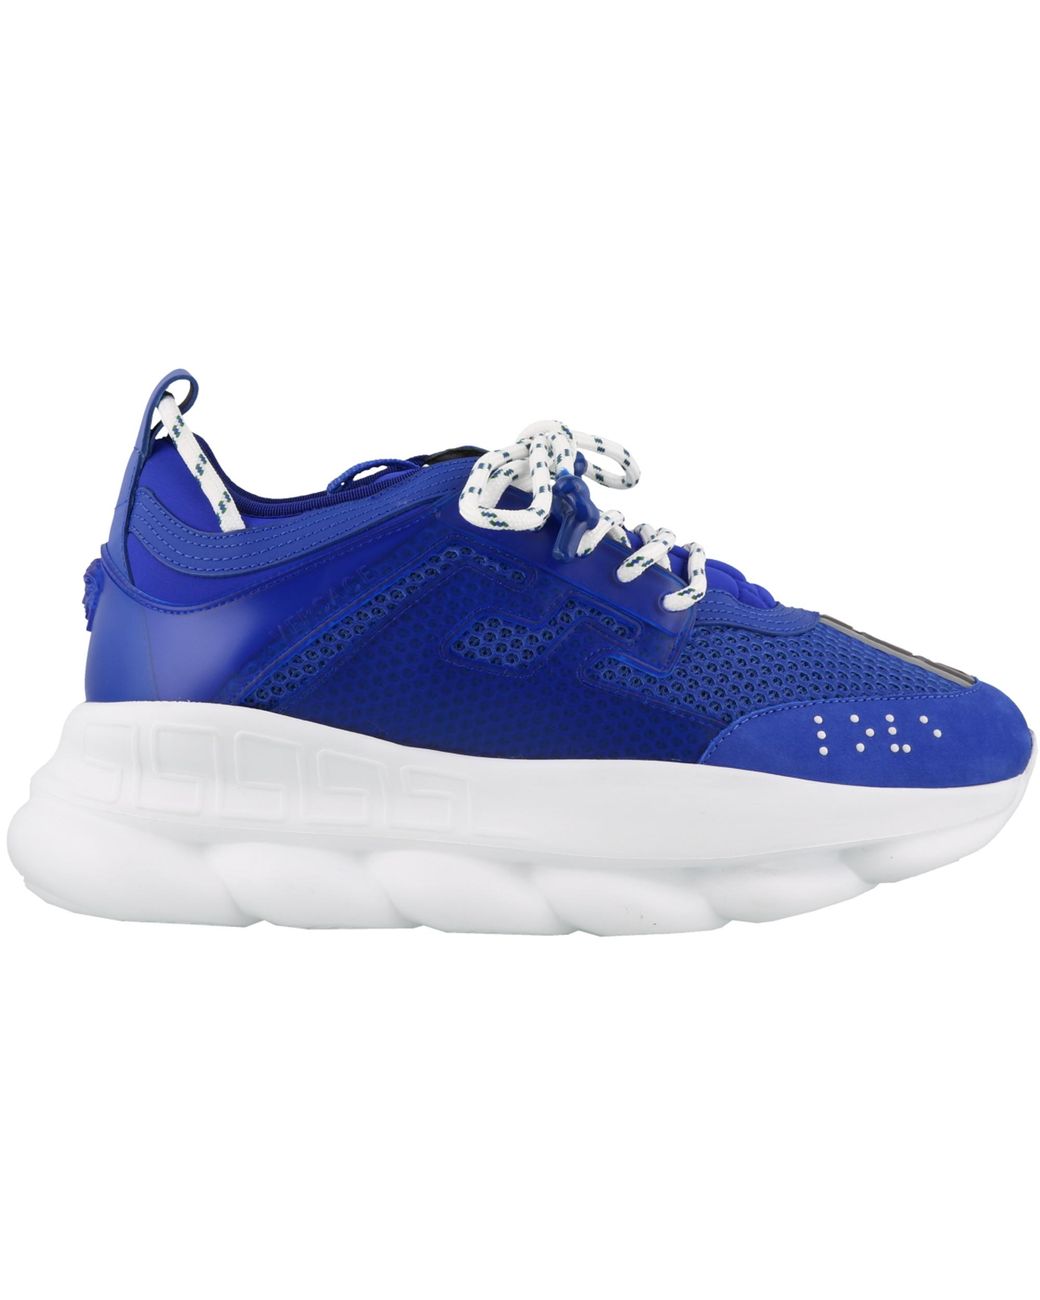 Versace Leather Chain Reaction Sneaker in Blue for Men - Save 21% - Lyst